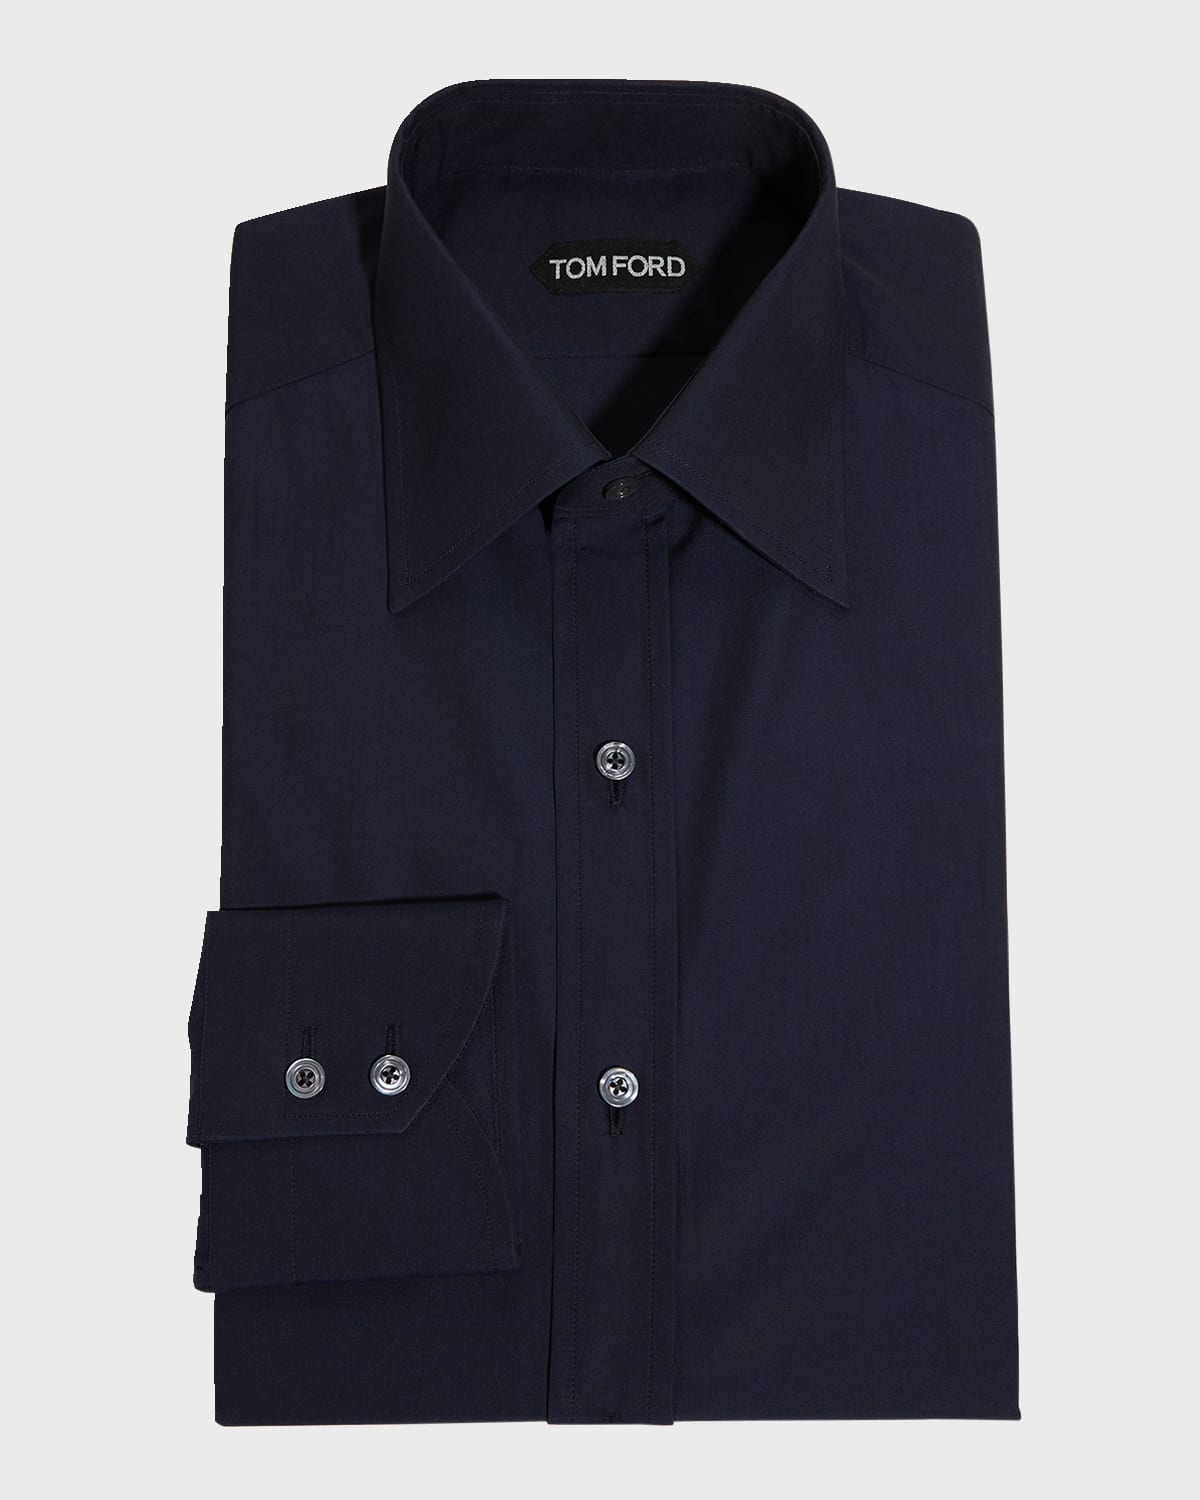 TOM FORD Men's Solid Point Collar Dress Shirt | Neiman Marcus